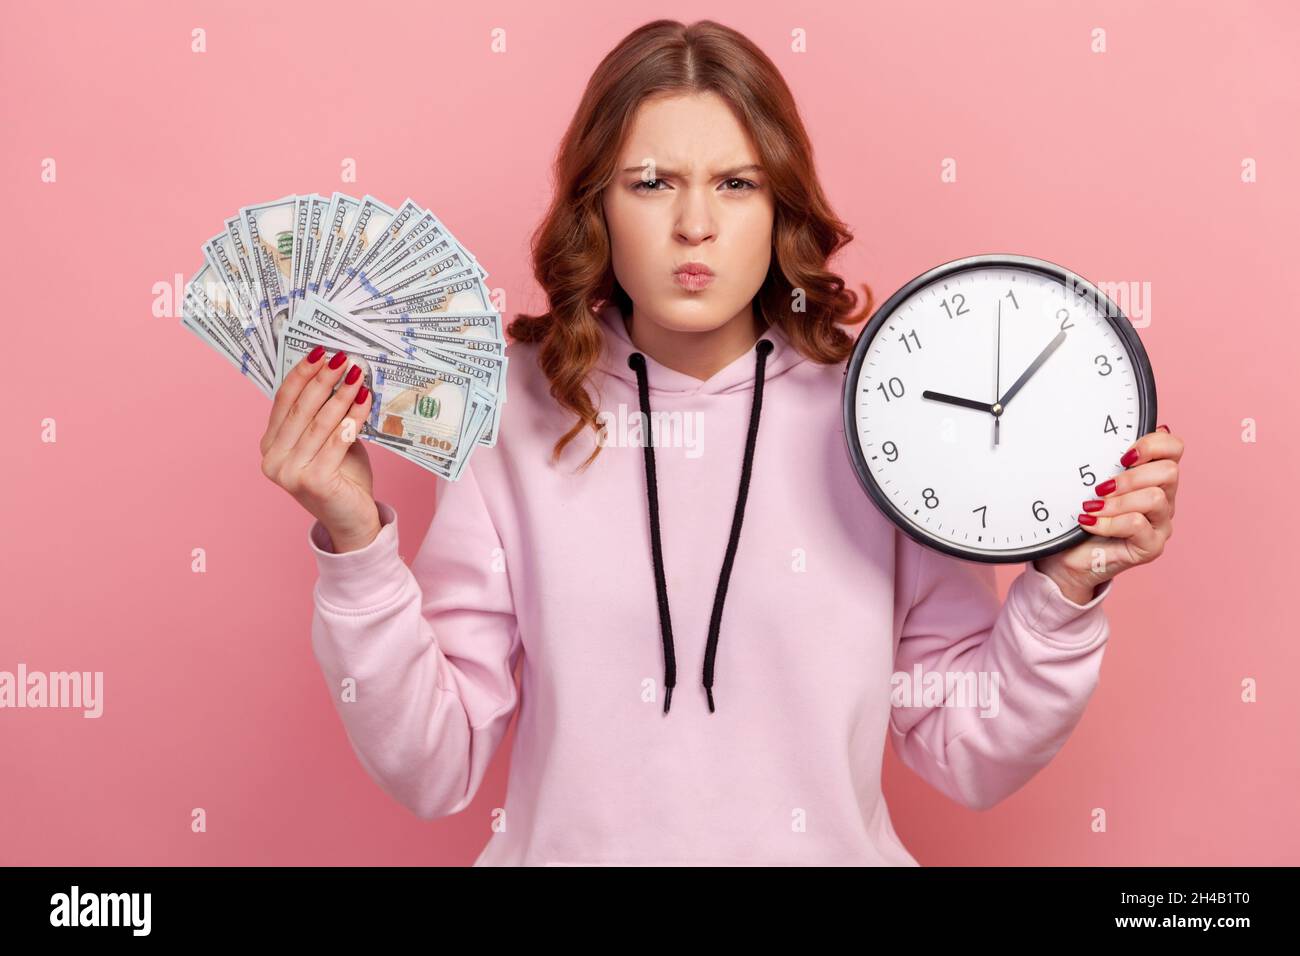 Portrait of angry displeased curly haired teen girl in hoodie holding dollar banknotes and wall clock, looking strictly at camera. Indoor studio shot isolated on pink background Stock Photo